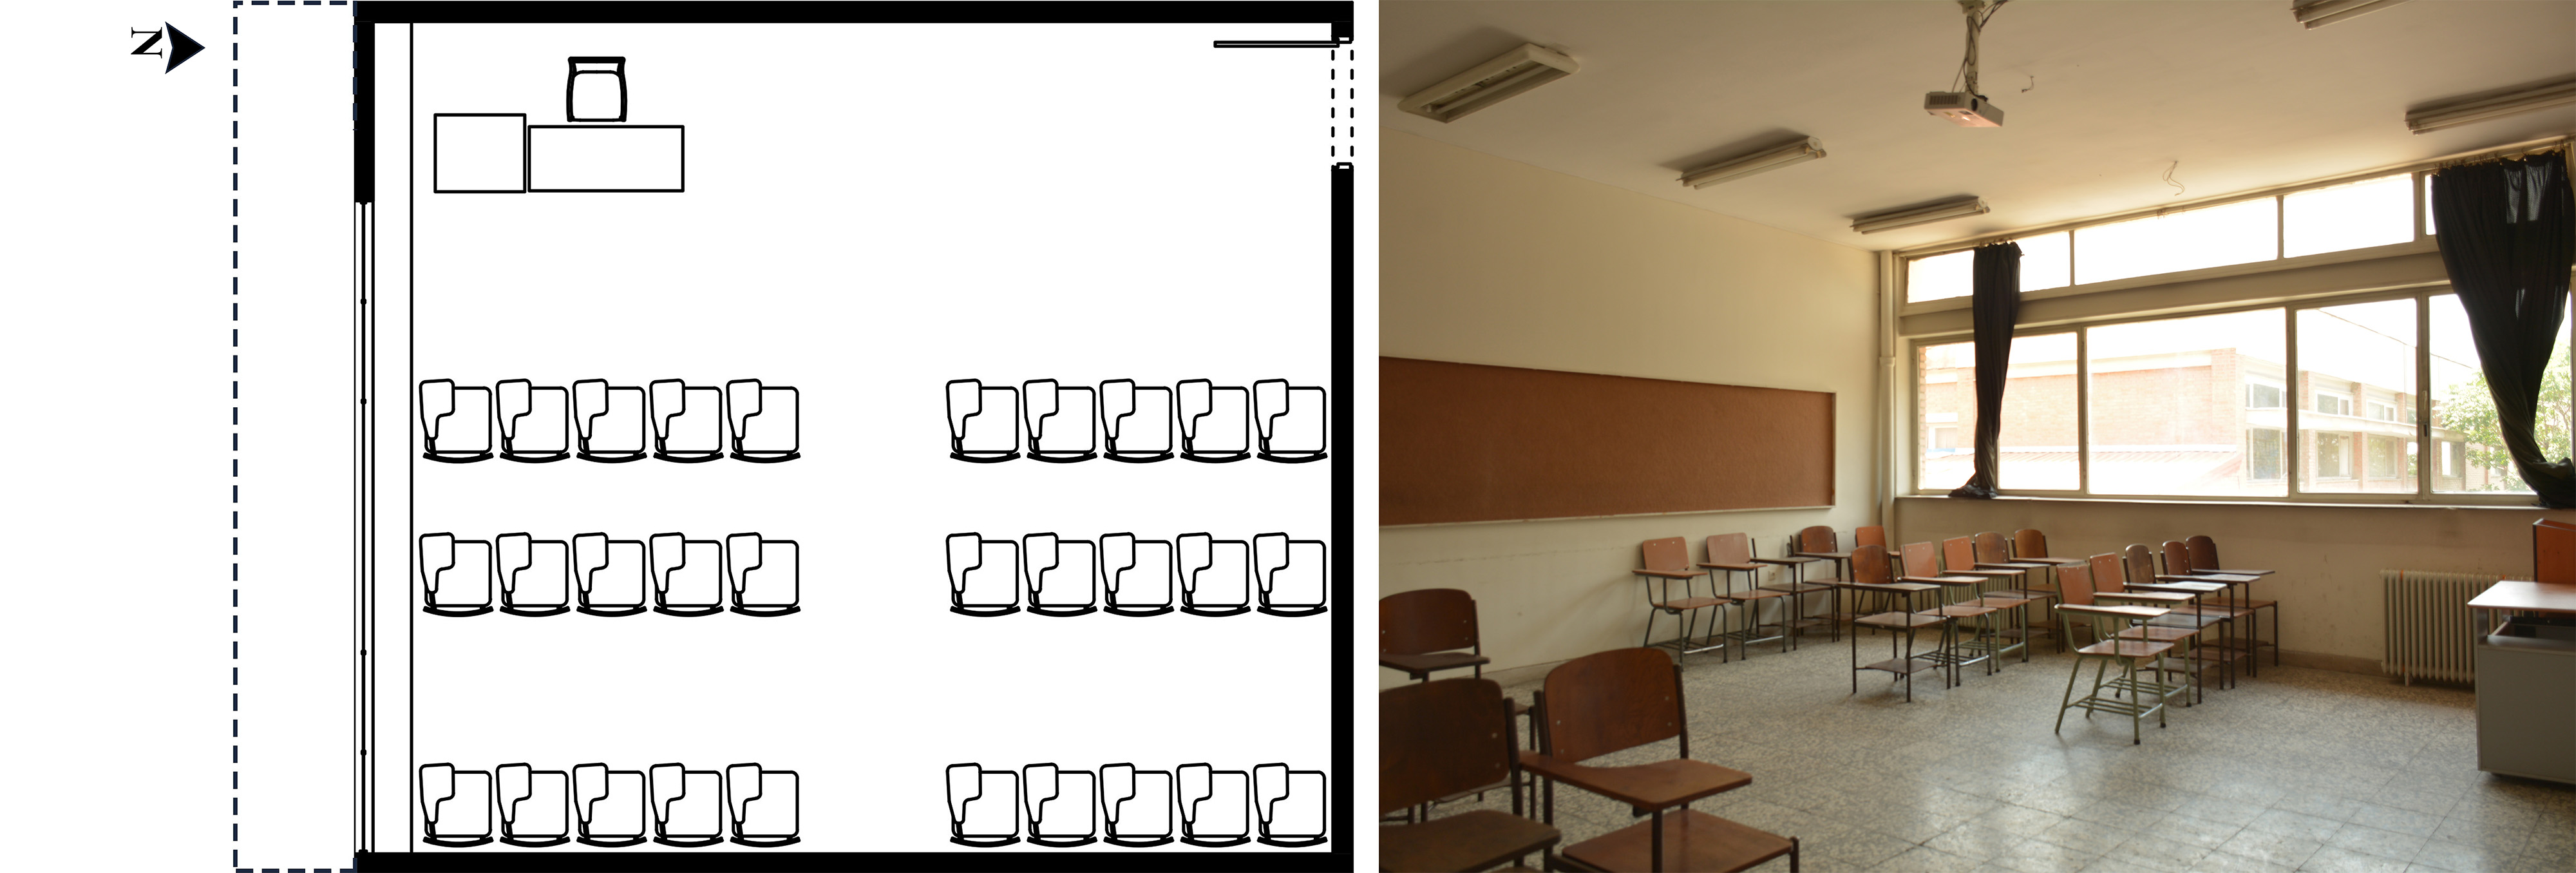 The classroom in Shahid Beheshti University - the real environment that is the basis to the simulated spaces shown in VR.